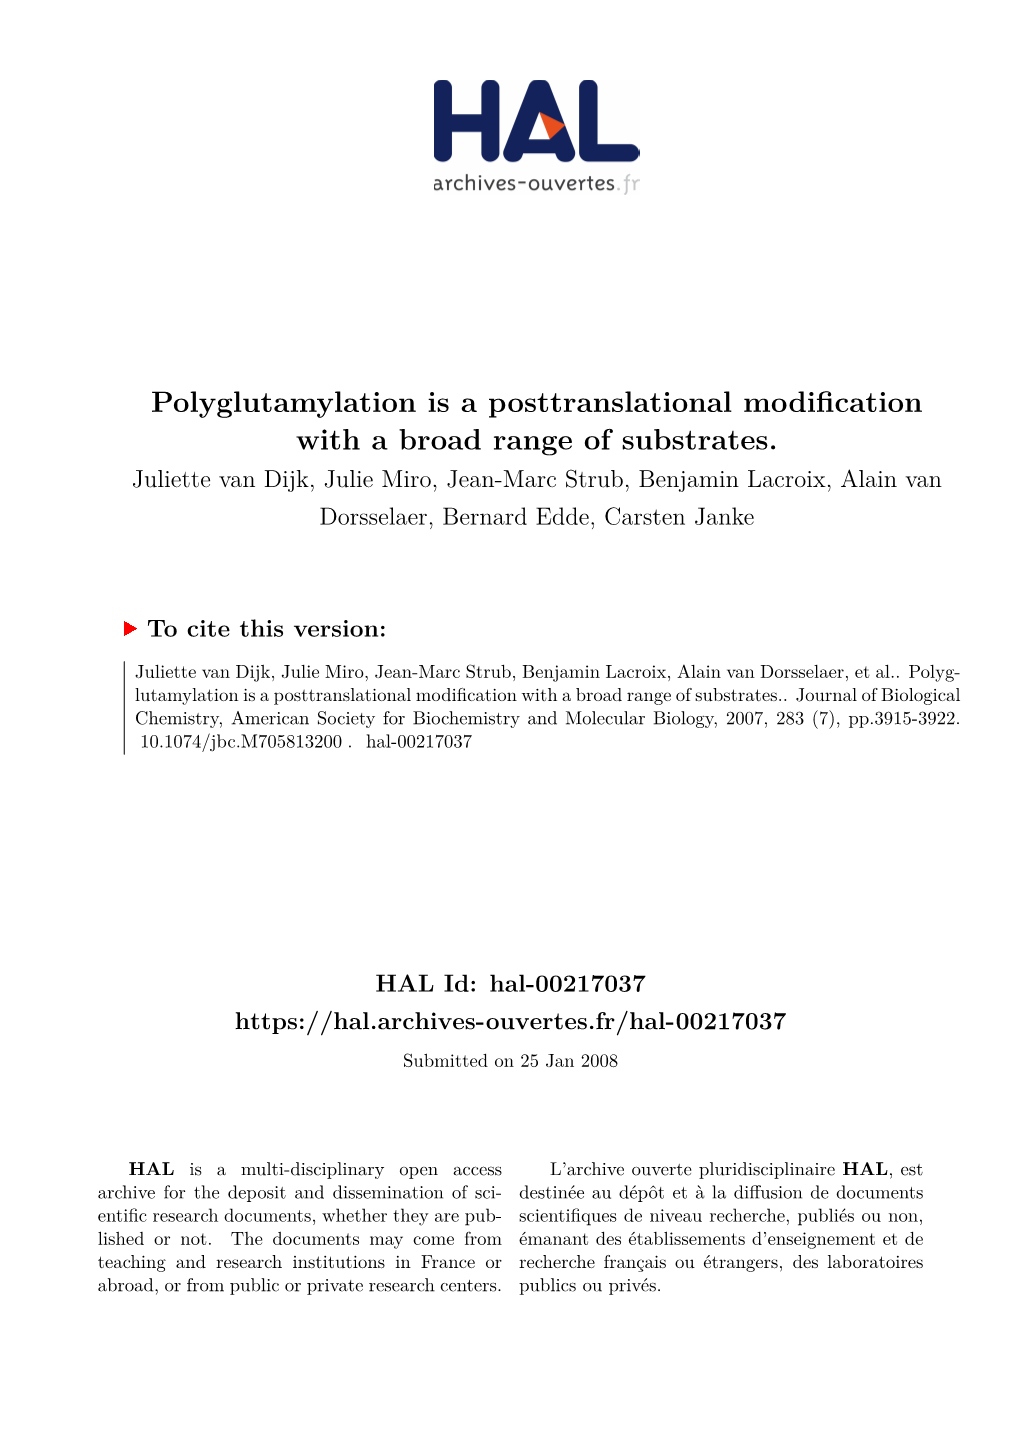 Polyglutamylation Is a Posttranslational Modification with a Broad Range of Substrates